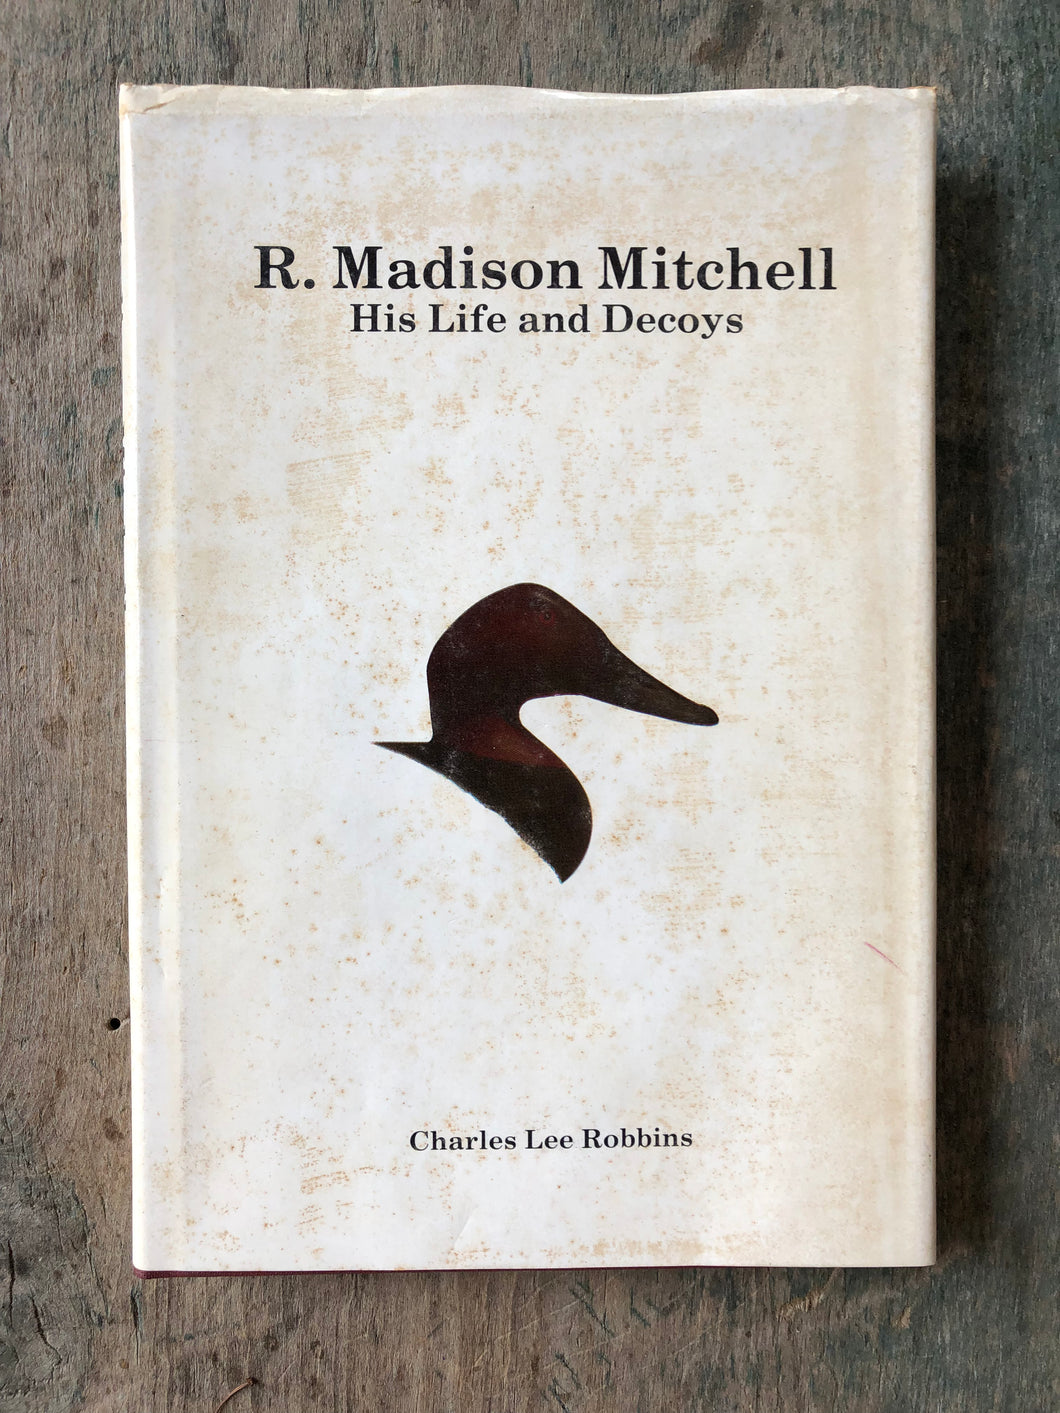 R. Madison Mitchell: His Life and Decoys. Text and Photographs by Charles Lee Robbins